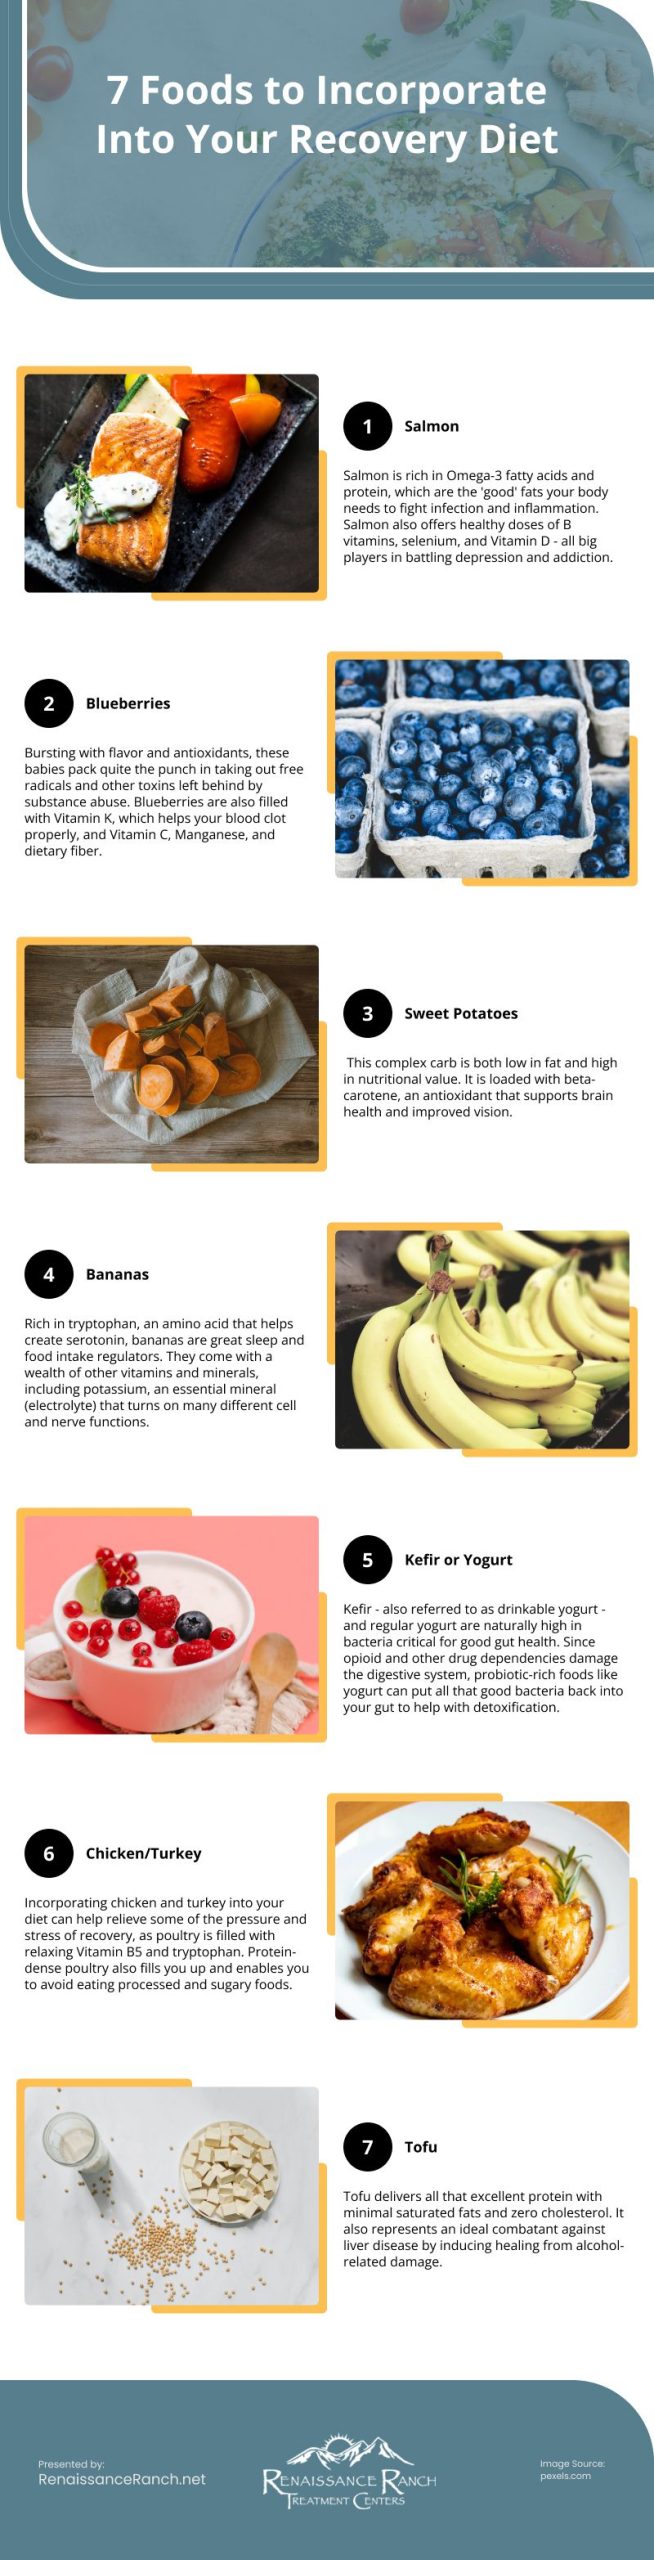 7 Foods to Incorporate Into Your Recovery Diet Infographic